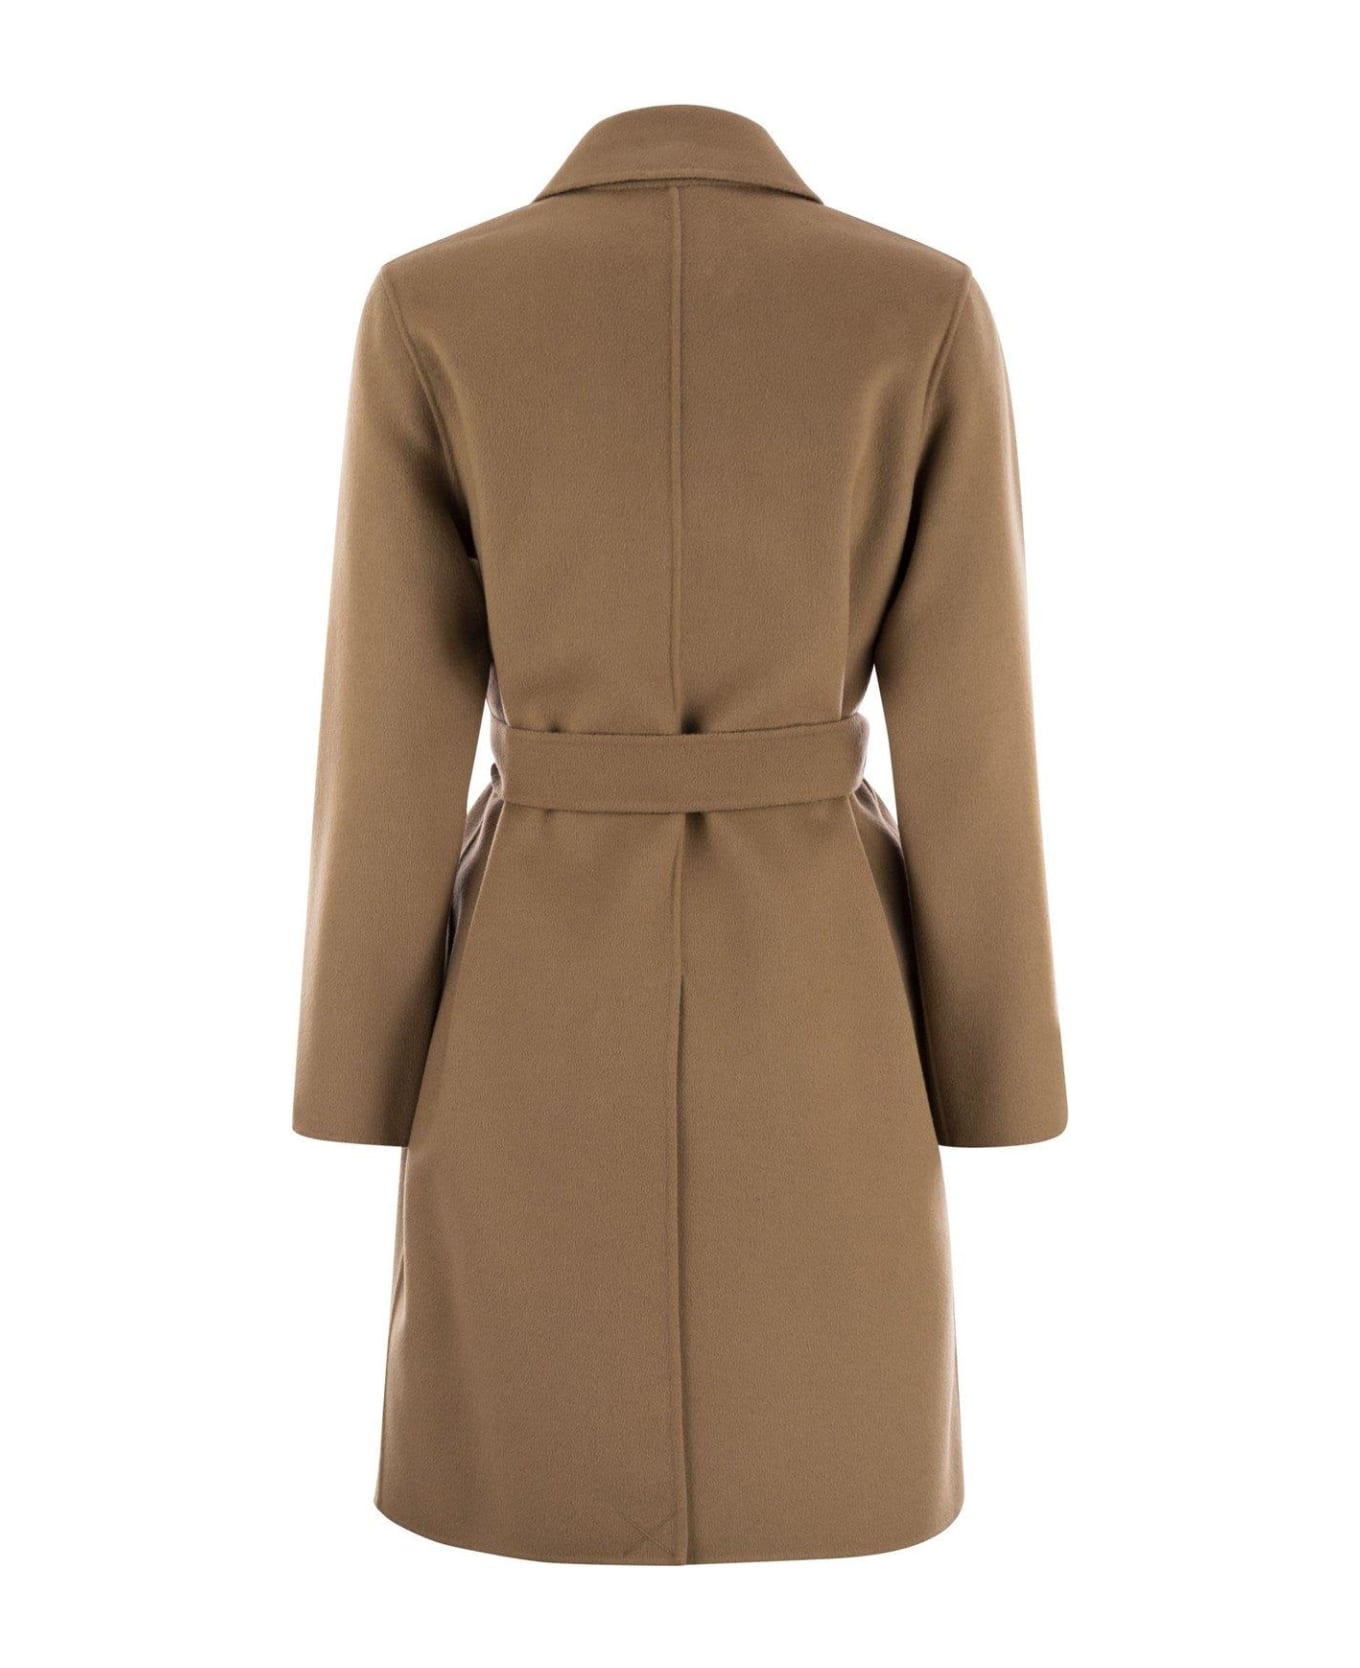 Weekend Max Mara Double-breasted Belted Coat - BROWN